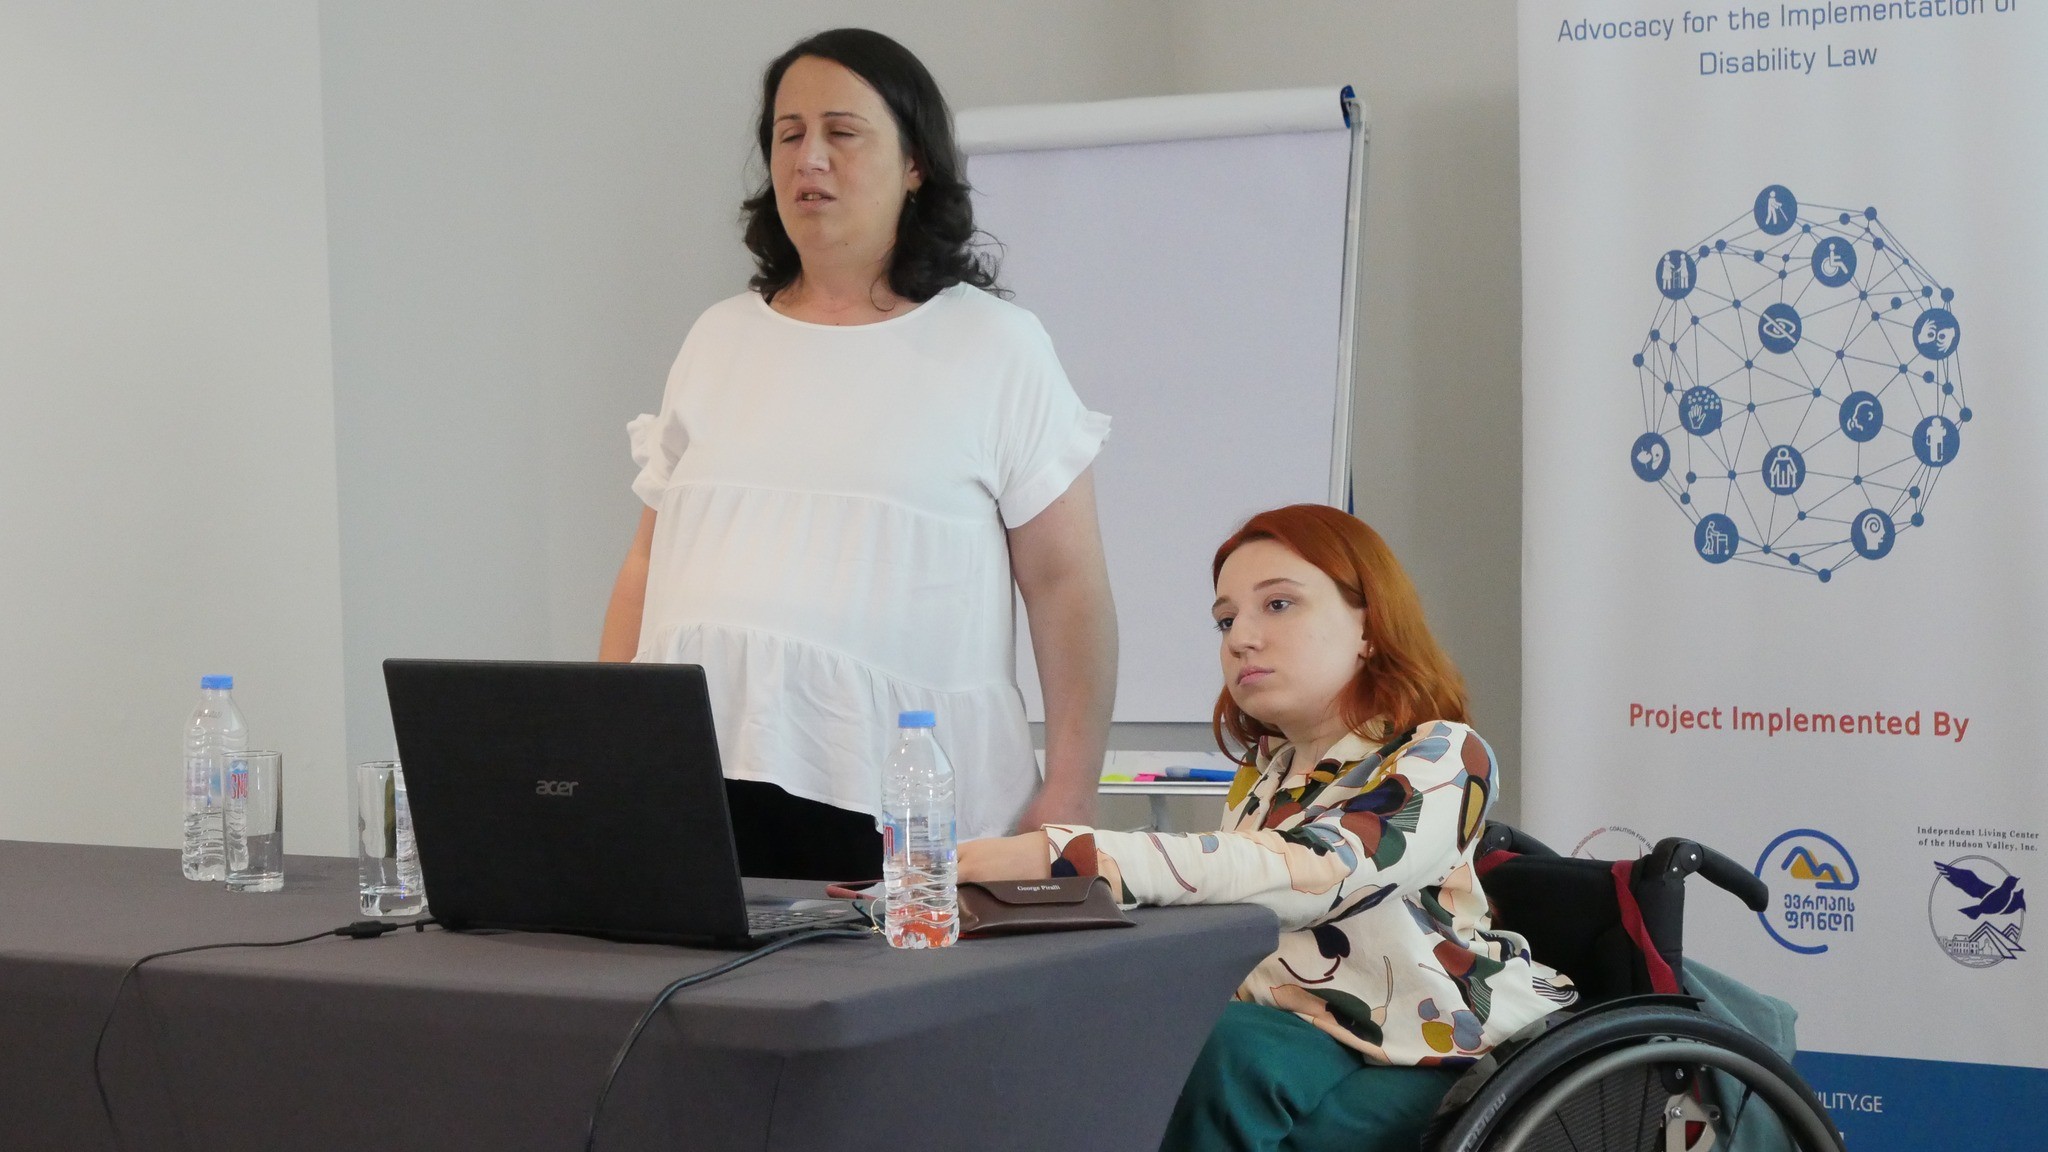 TRAINERS NATA BUKIA AND MAGDA BEZHANISHVILI CONDUCTED TRAINING ON ISSUES AFFECTING PERSONS WITH DISABILITIES